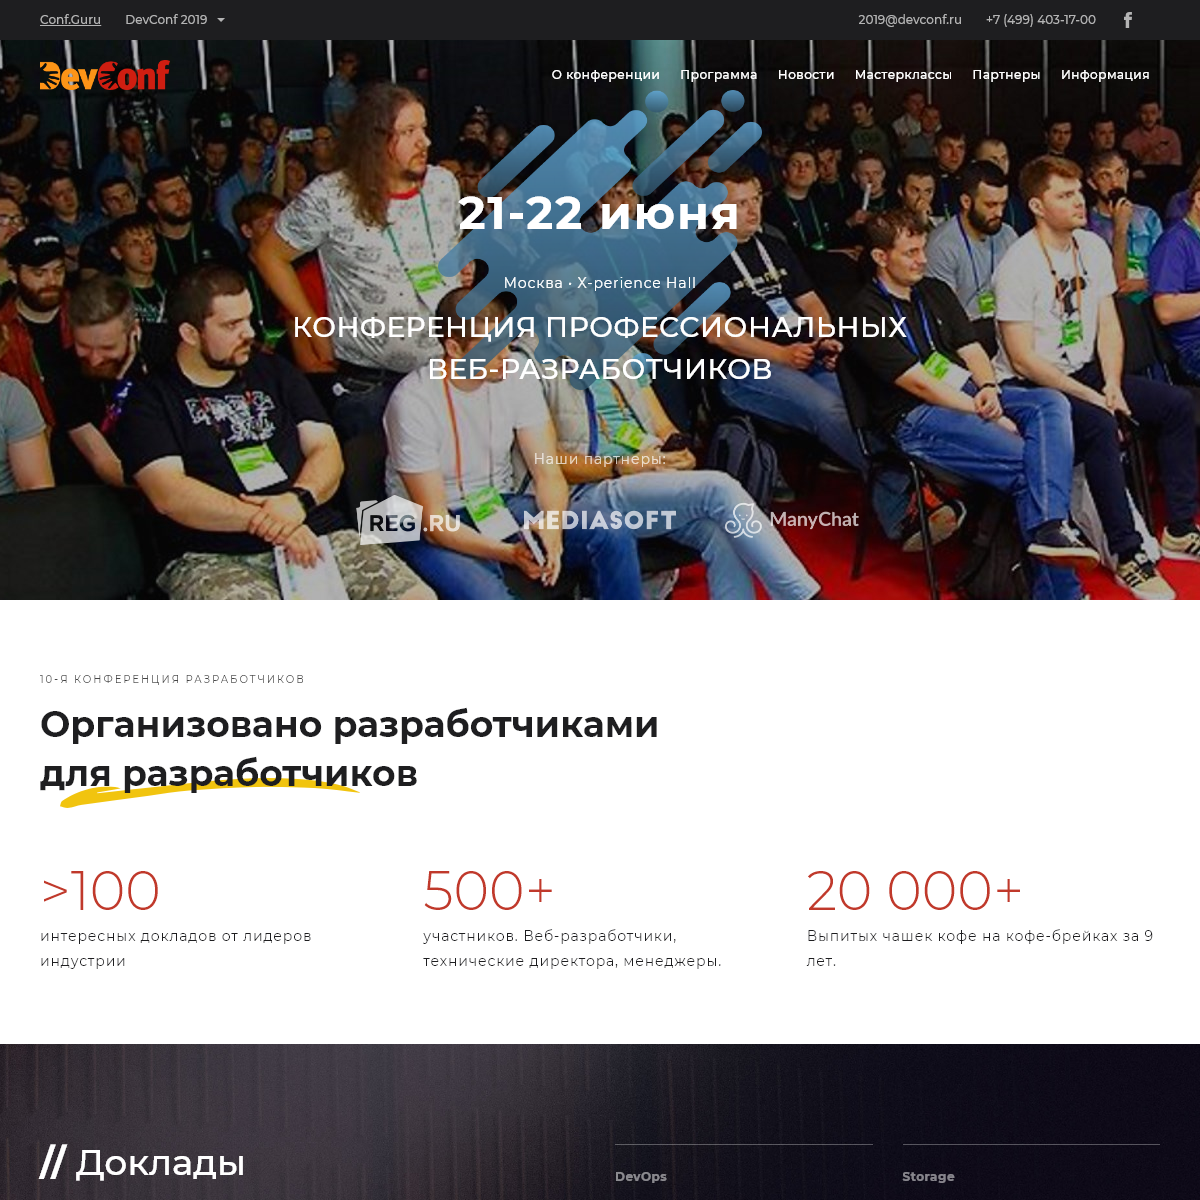 A complete backup of devconf.ru